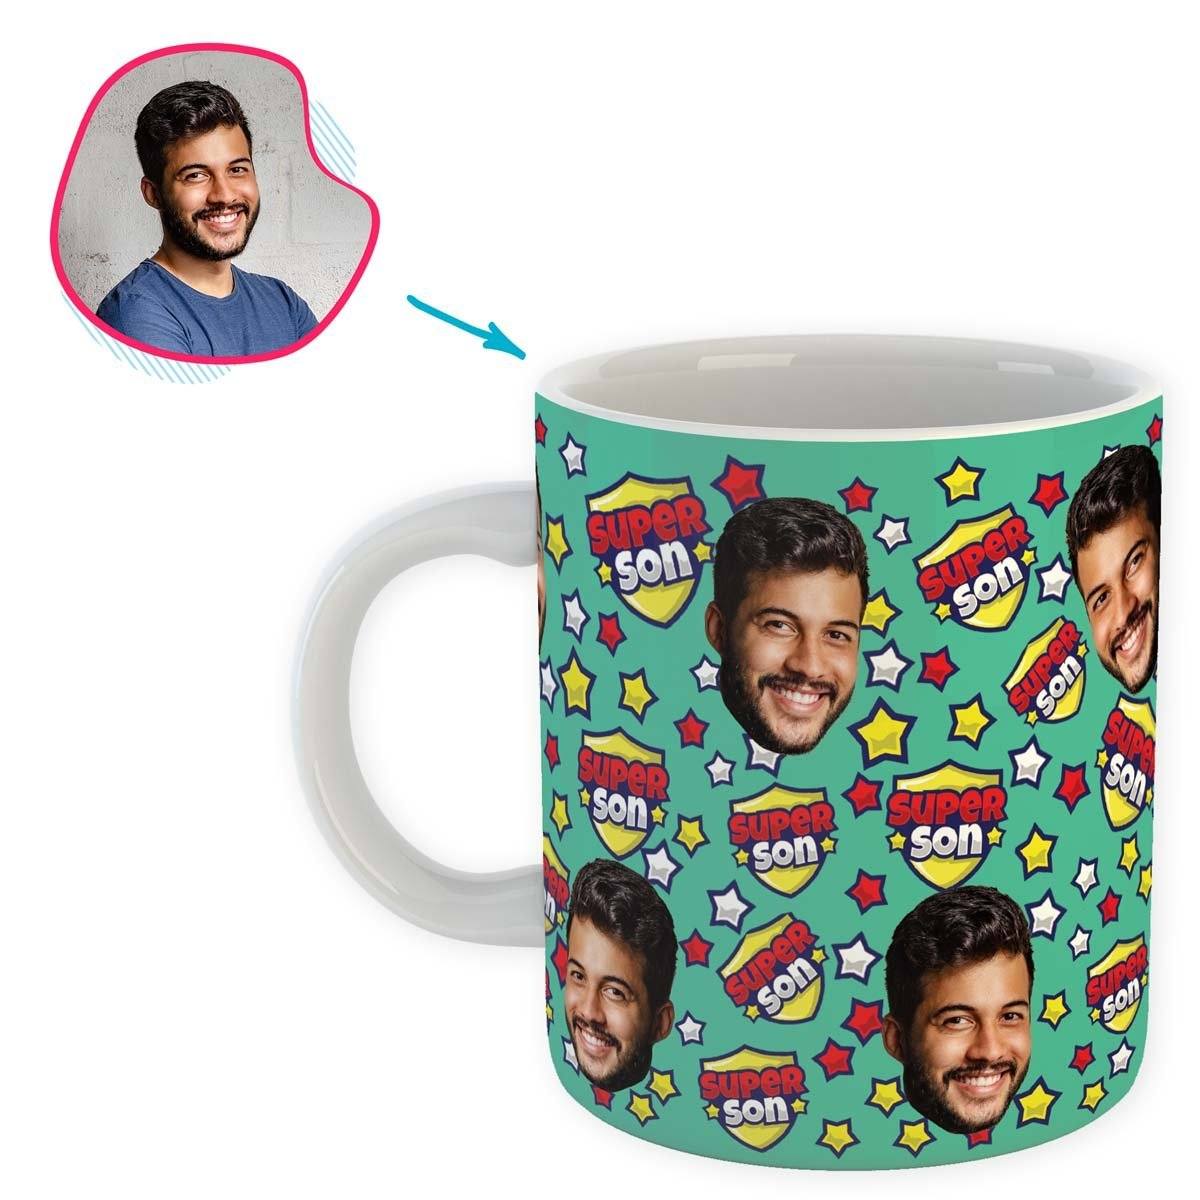 mint Super Son mug personalized with photo of face printed on it